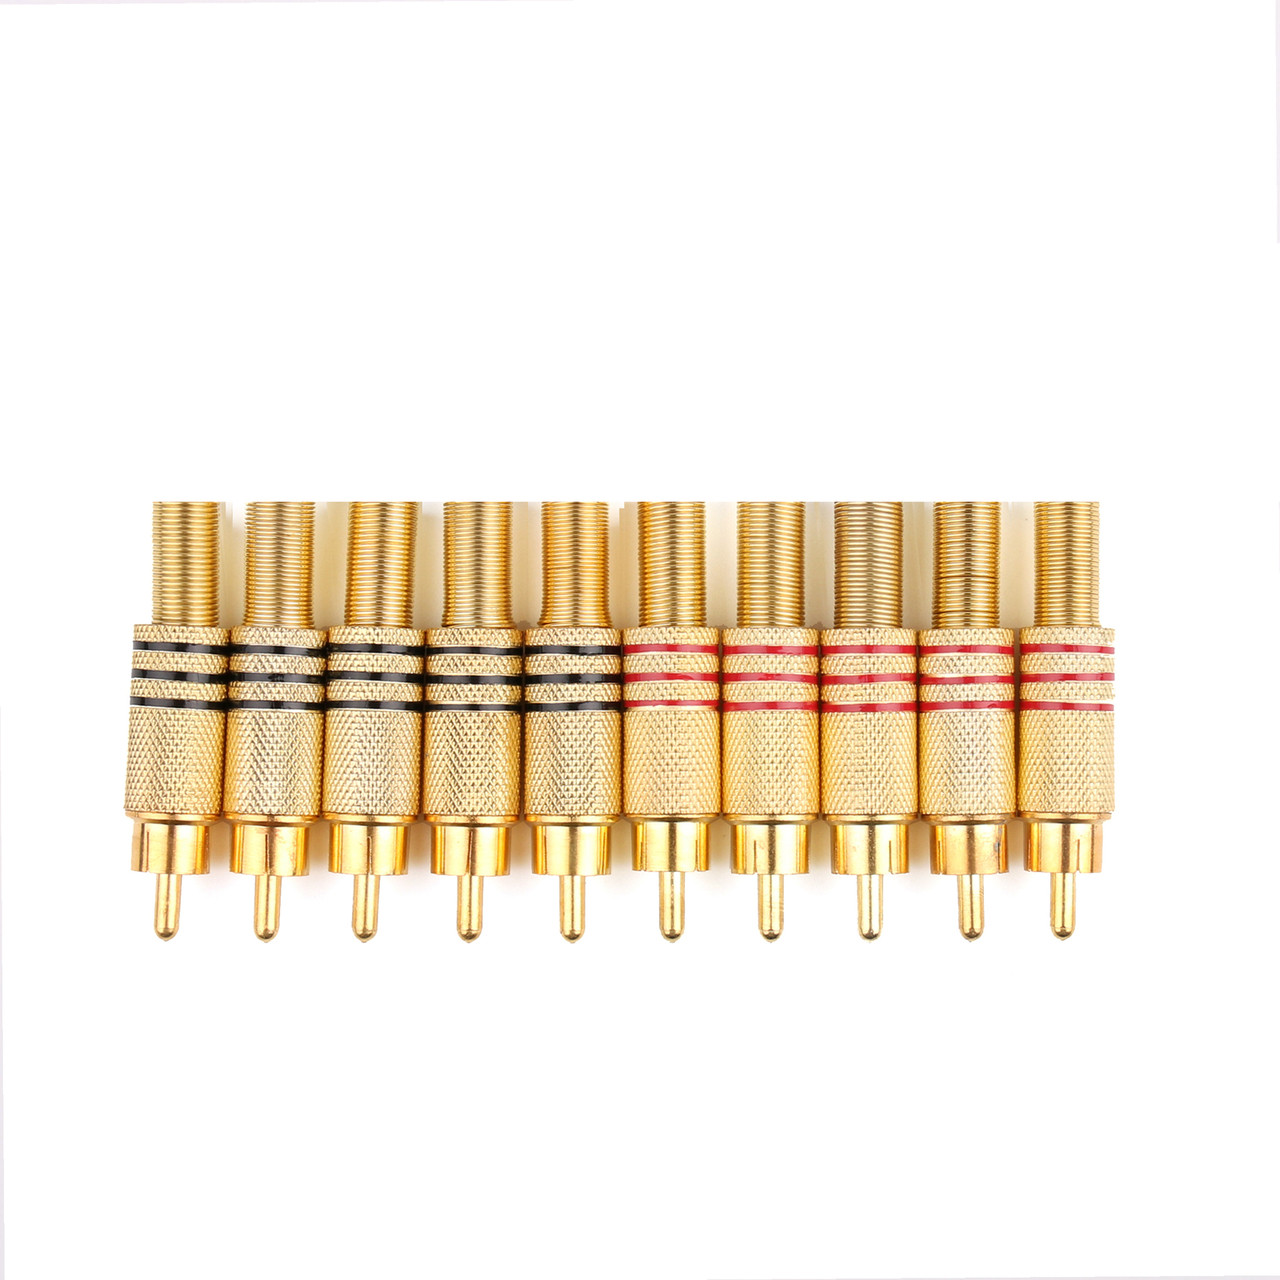 Mad Hornets 10PCS Gold Plated RCA Plug Audio Male Connector W Metal Spring